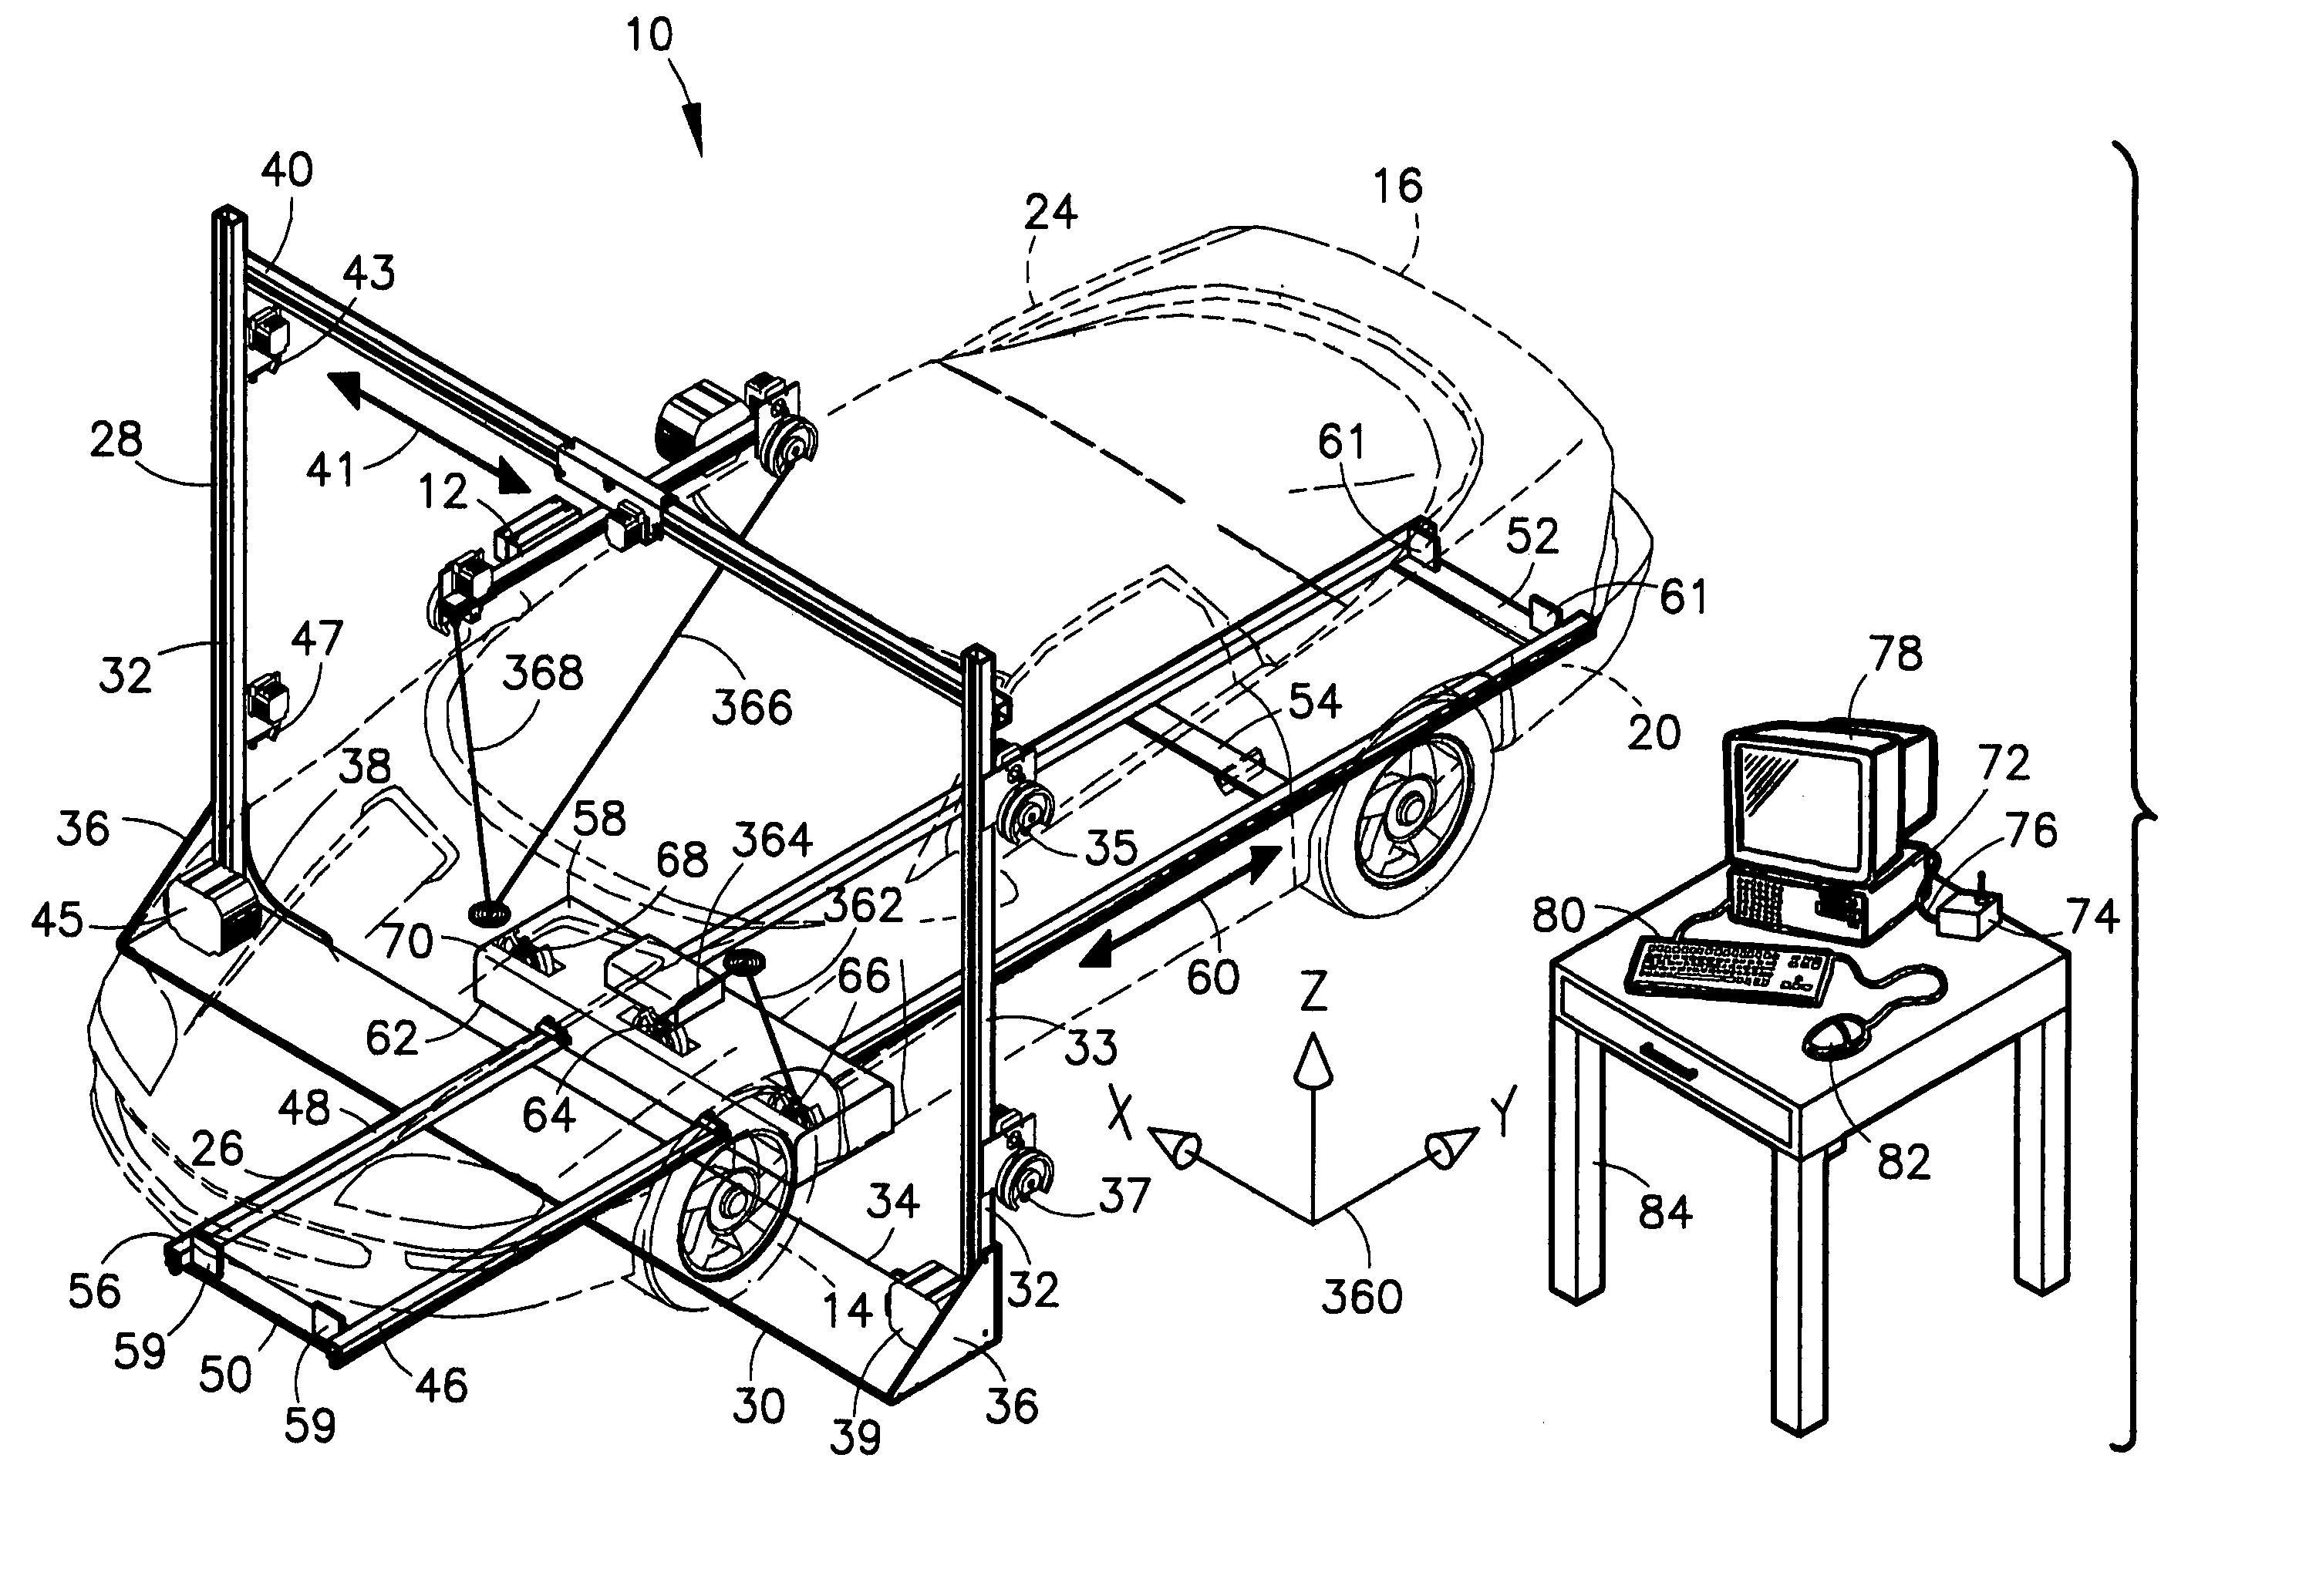 System for measuring points on a vehicle during damage repair